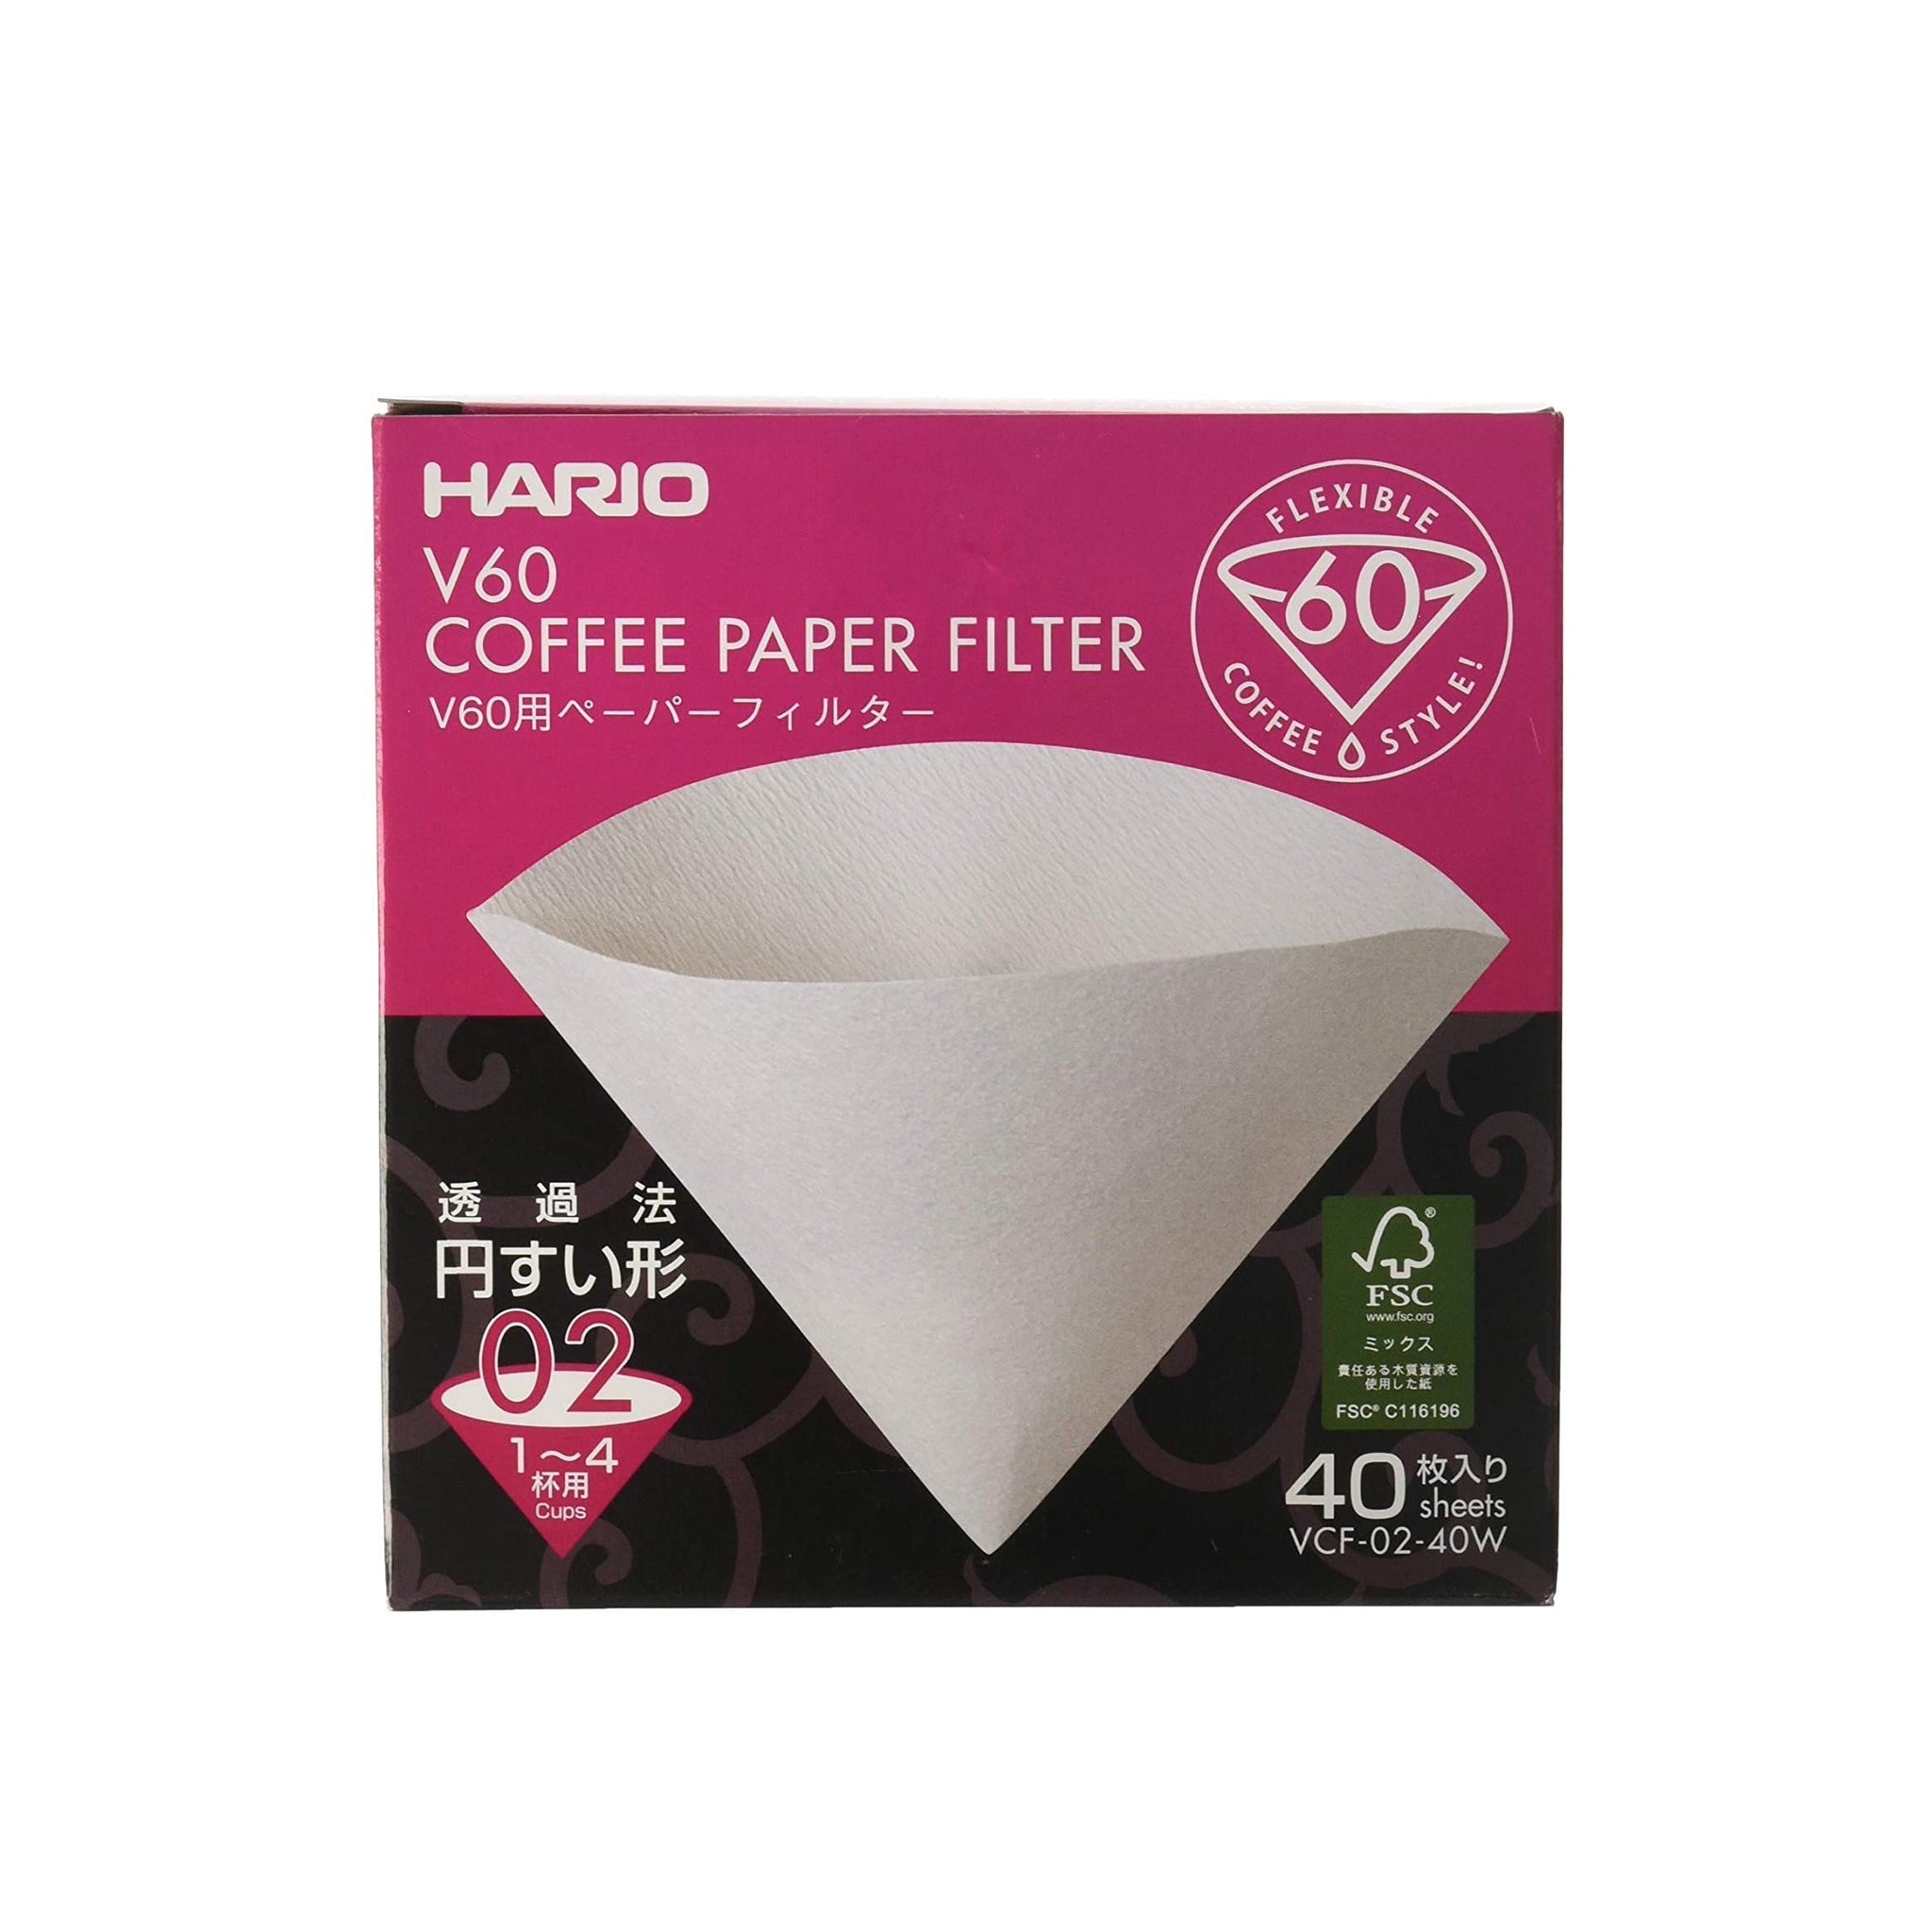 Hario V60 Filter Papers (01)